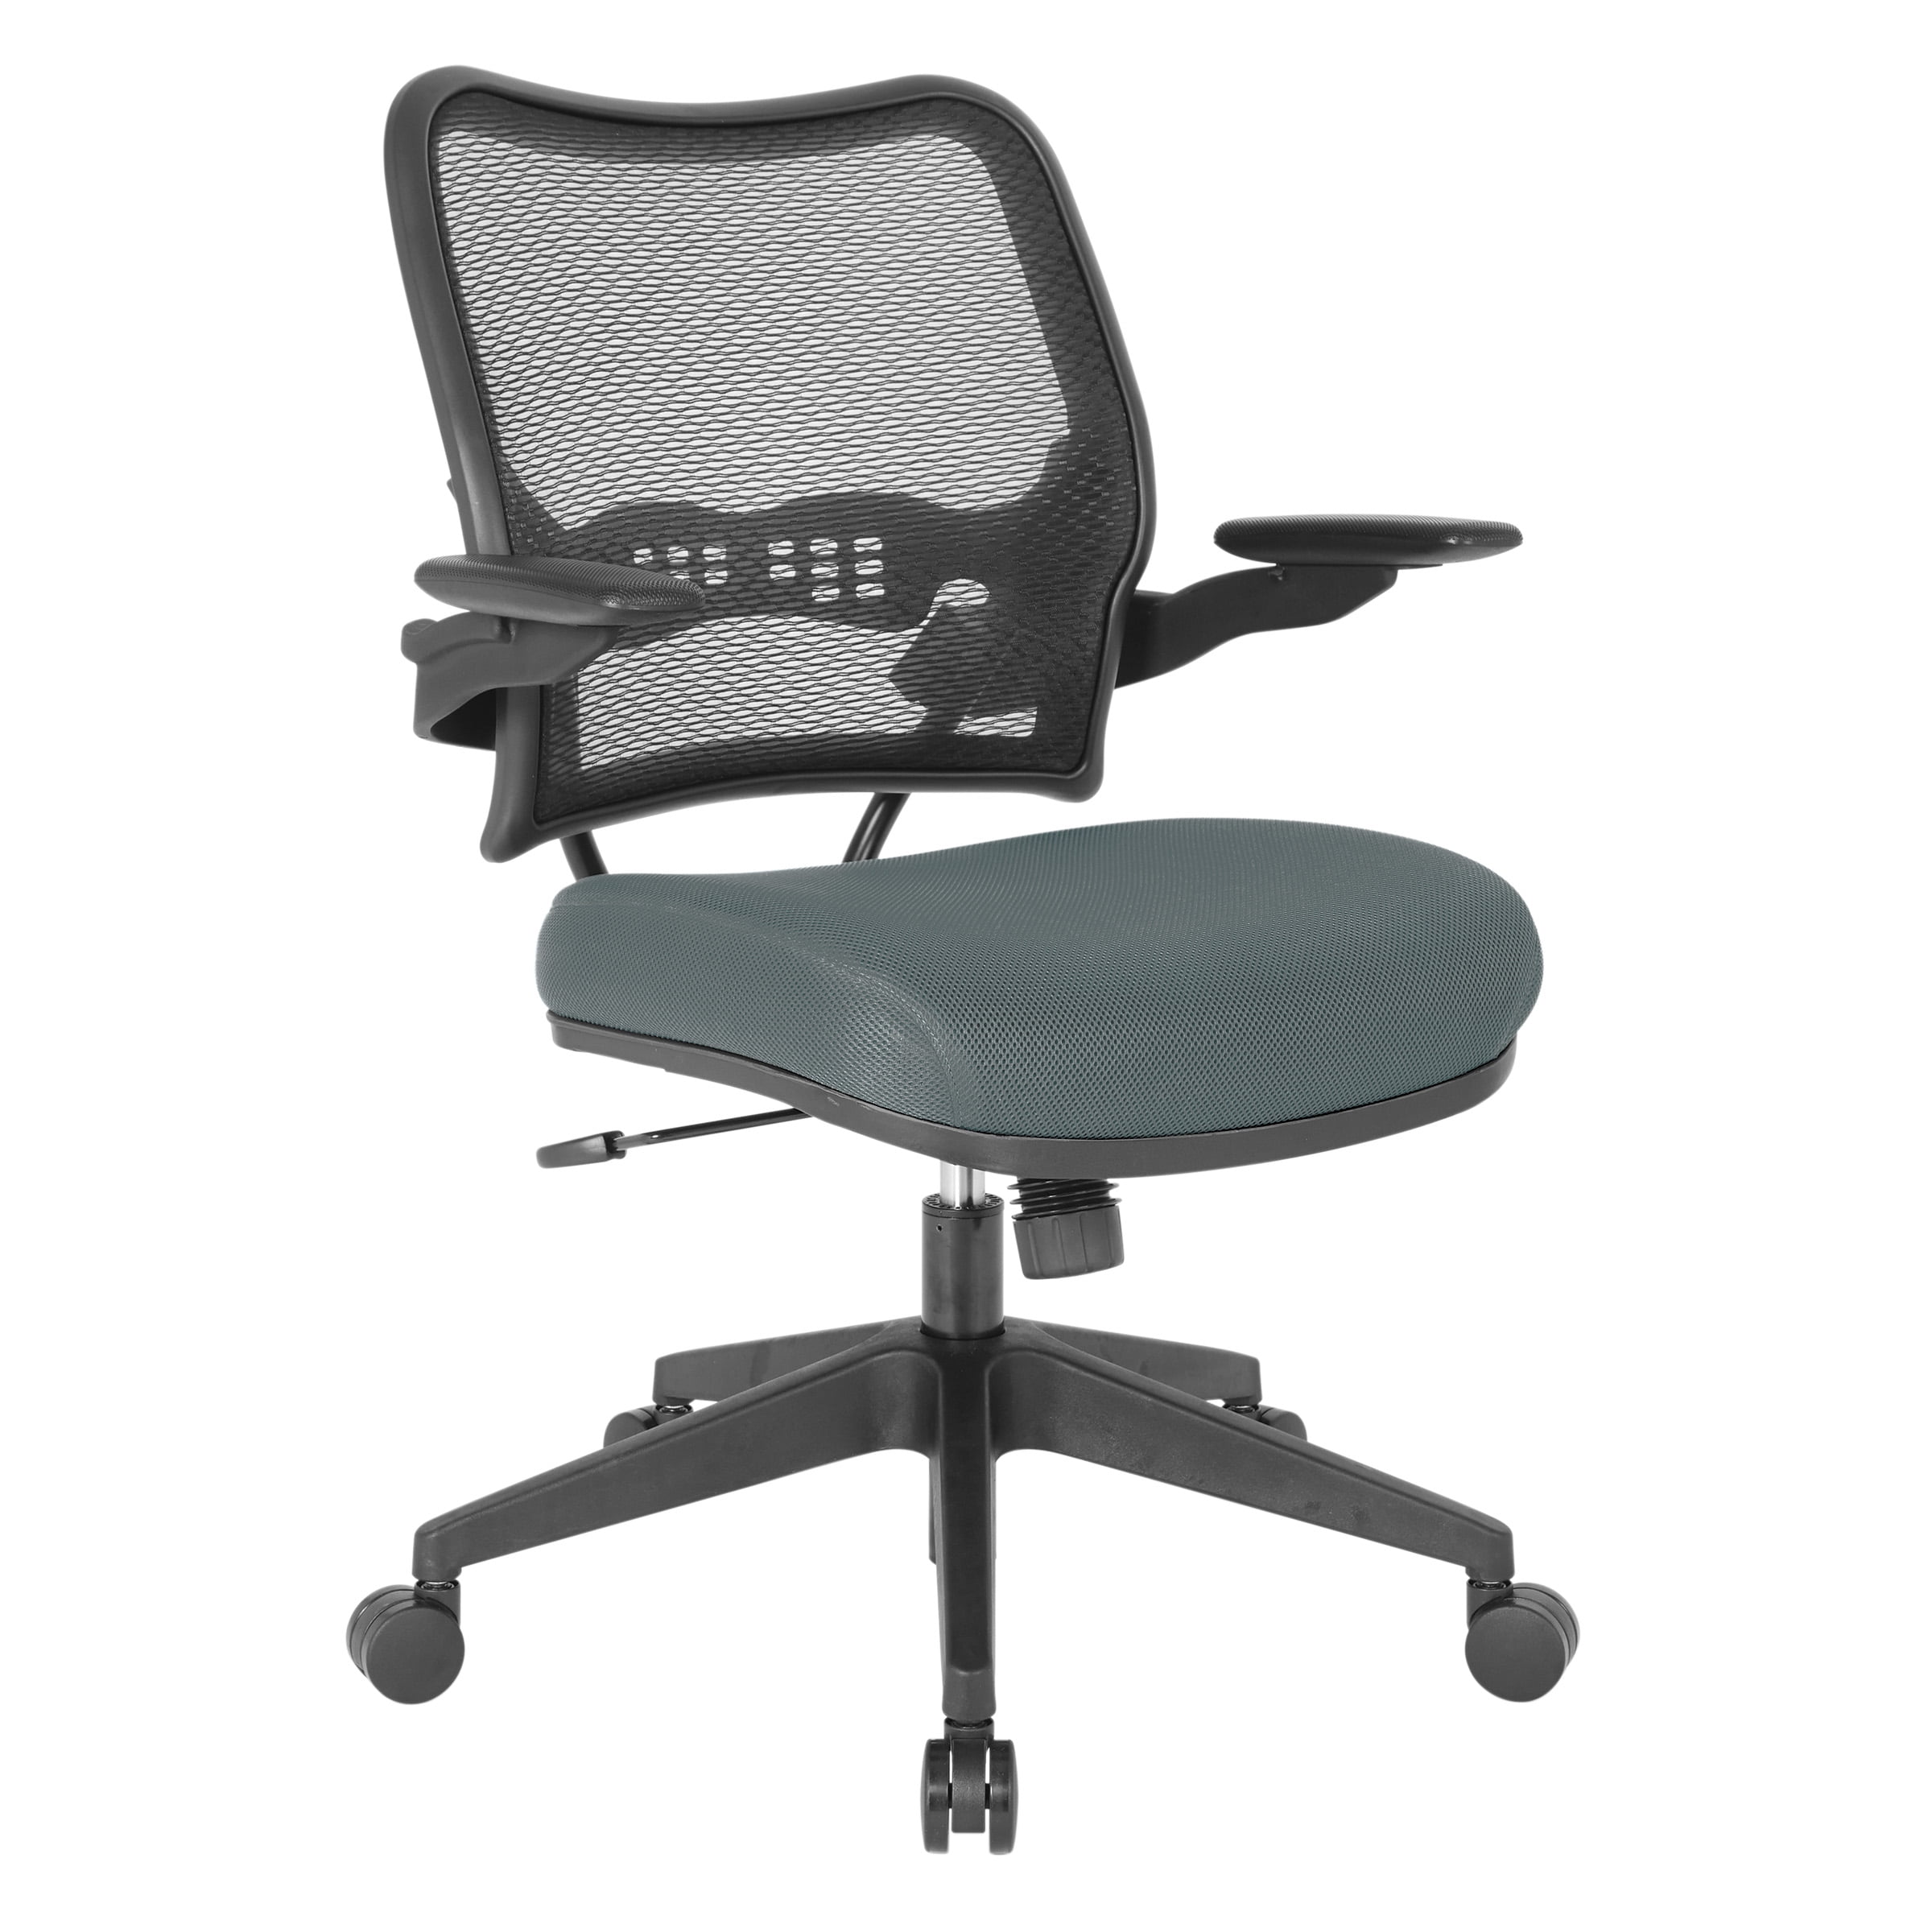 2-to-1 Synchro Tilt Control SPACE Seating AirGrid Seat and Back Latte 4-Way Adjustable Padded Flip Arms and Nylon Base Managers Chair 